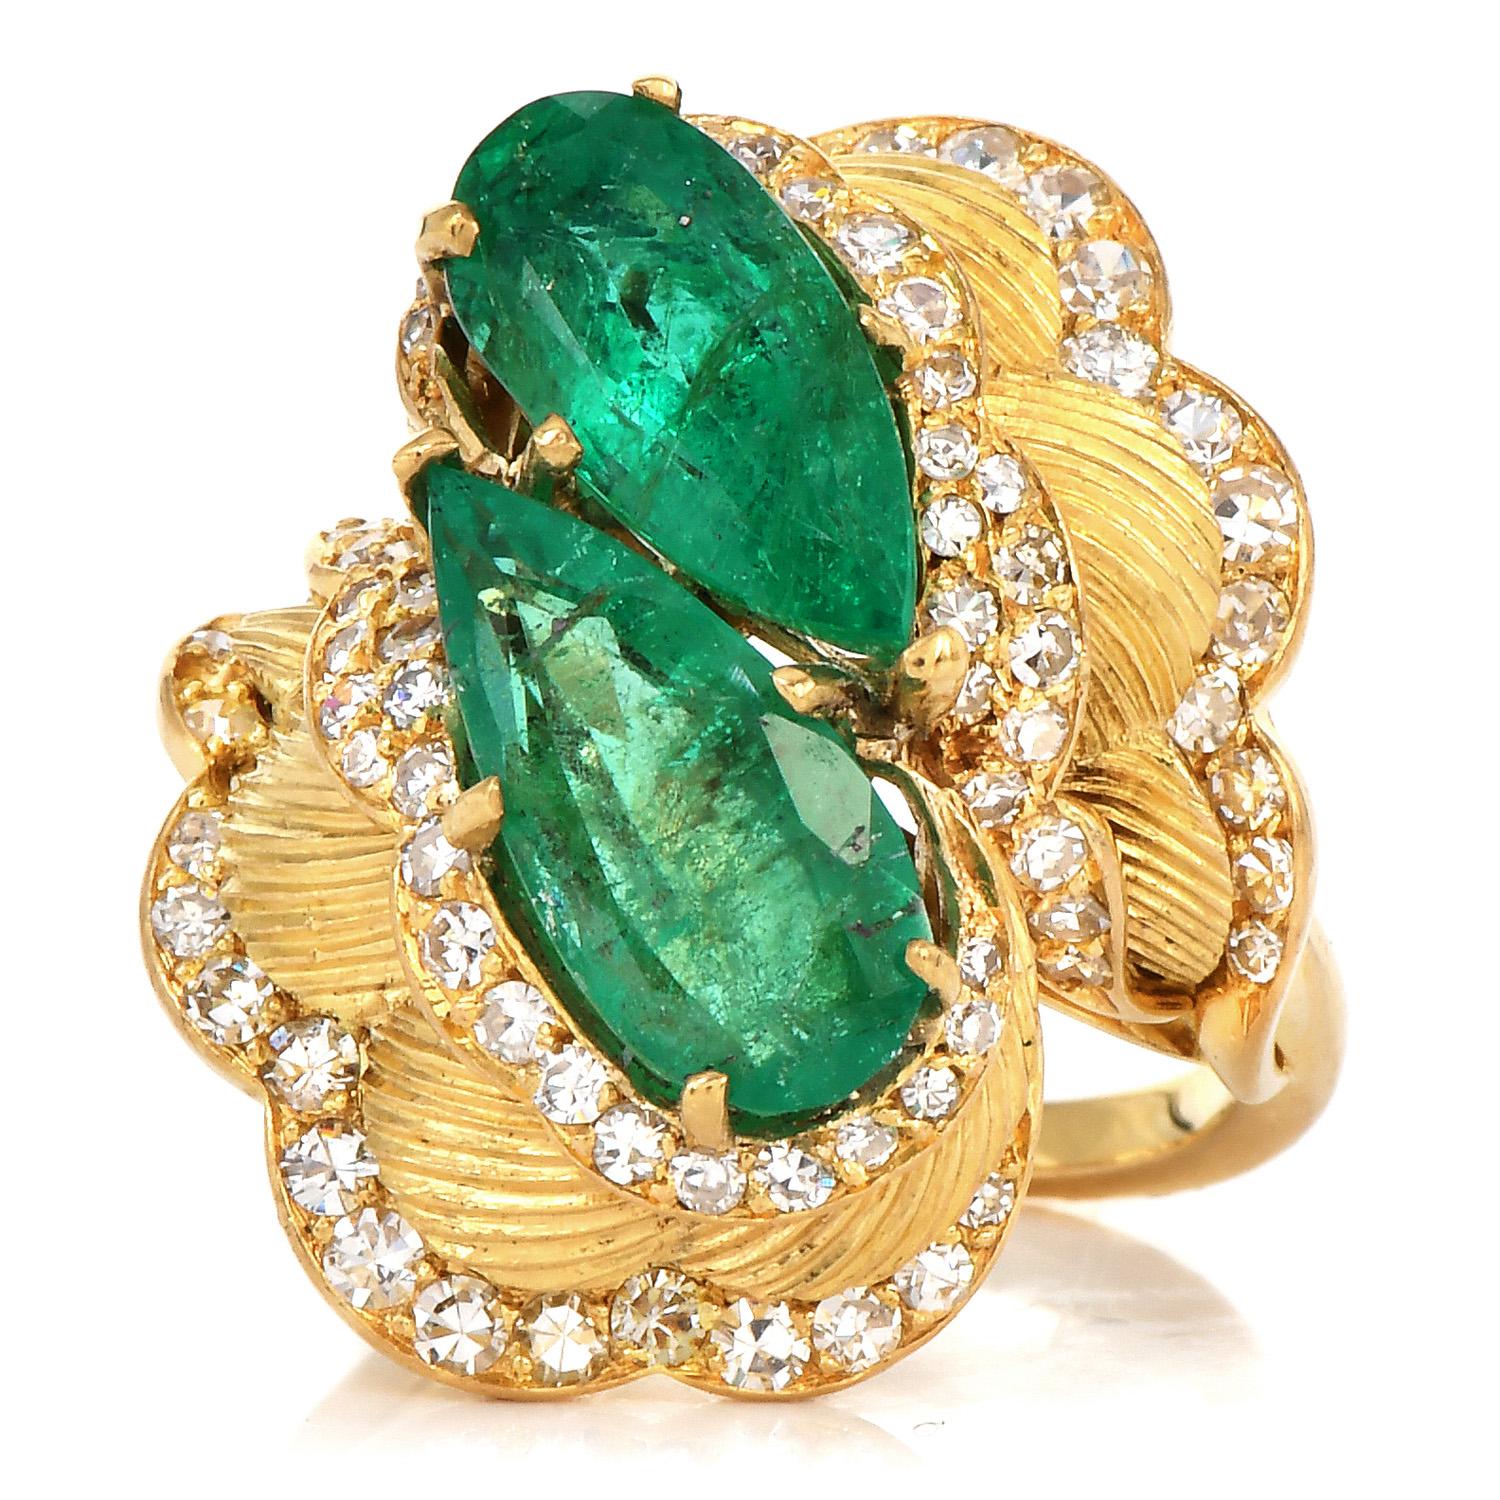 This vintage 1990s ring with a bypass style emeralds with diamonds is crafted in solid 18K Yellow Gold, with textured accents.

It weighs 11.8 grams and incorporates a scalloped vertical texture with diamond-accented borders.

The vivid green center